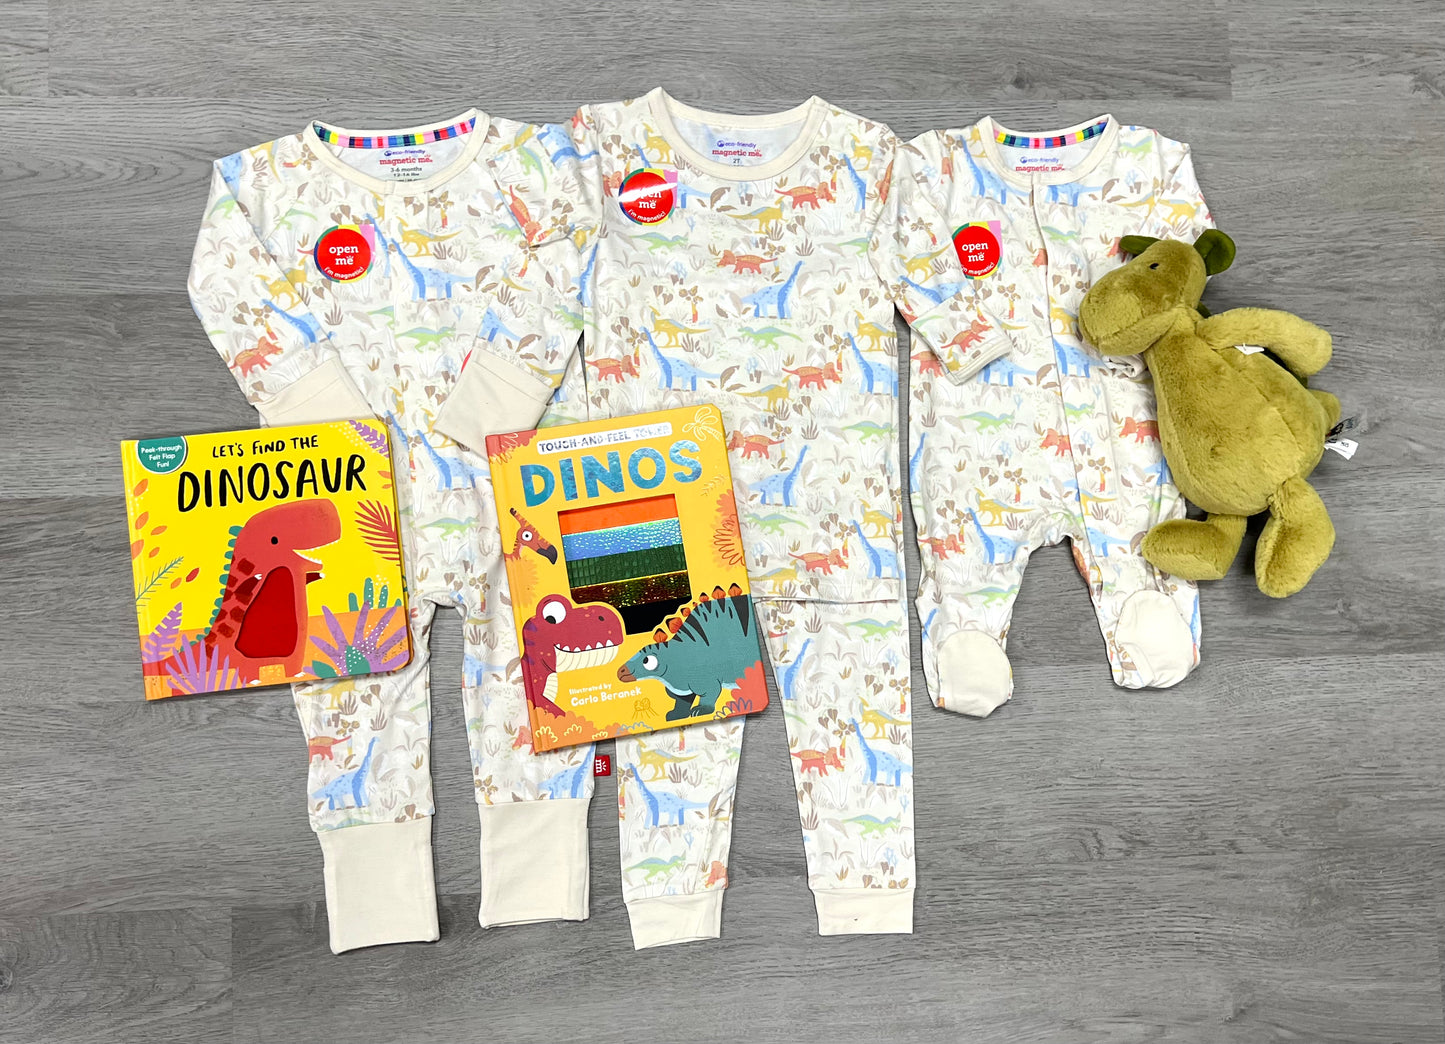 Ext-Roar-Dinary Modal Magnetic Grow w/ Me Coverall Baby Sleepwear Magnetic Me   